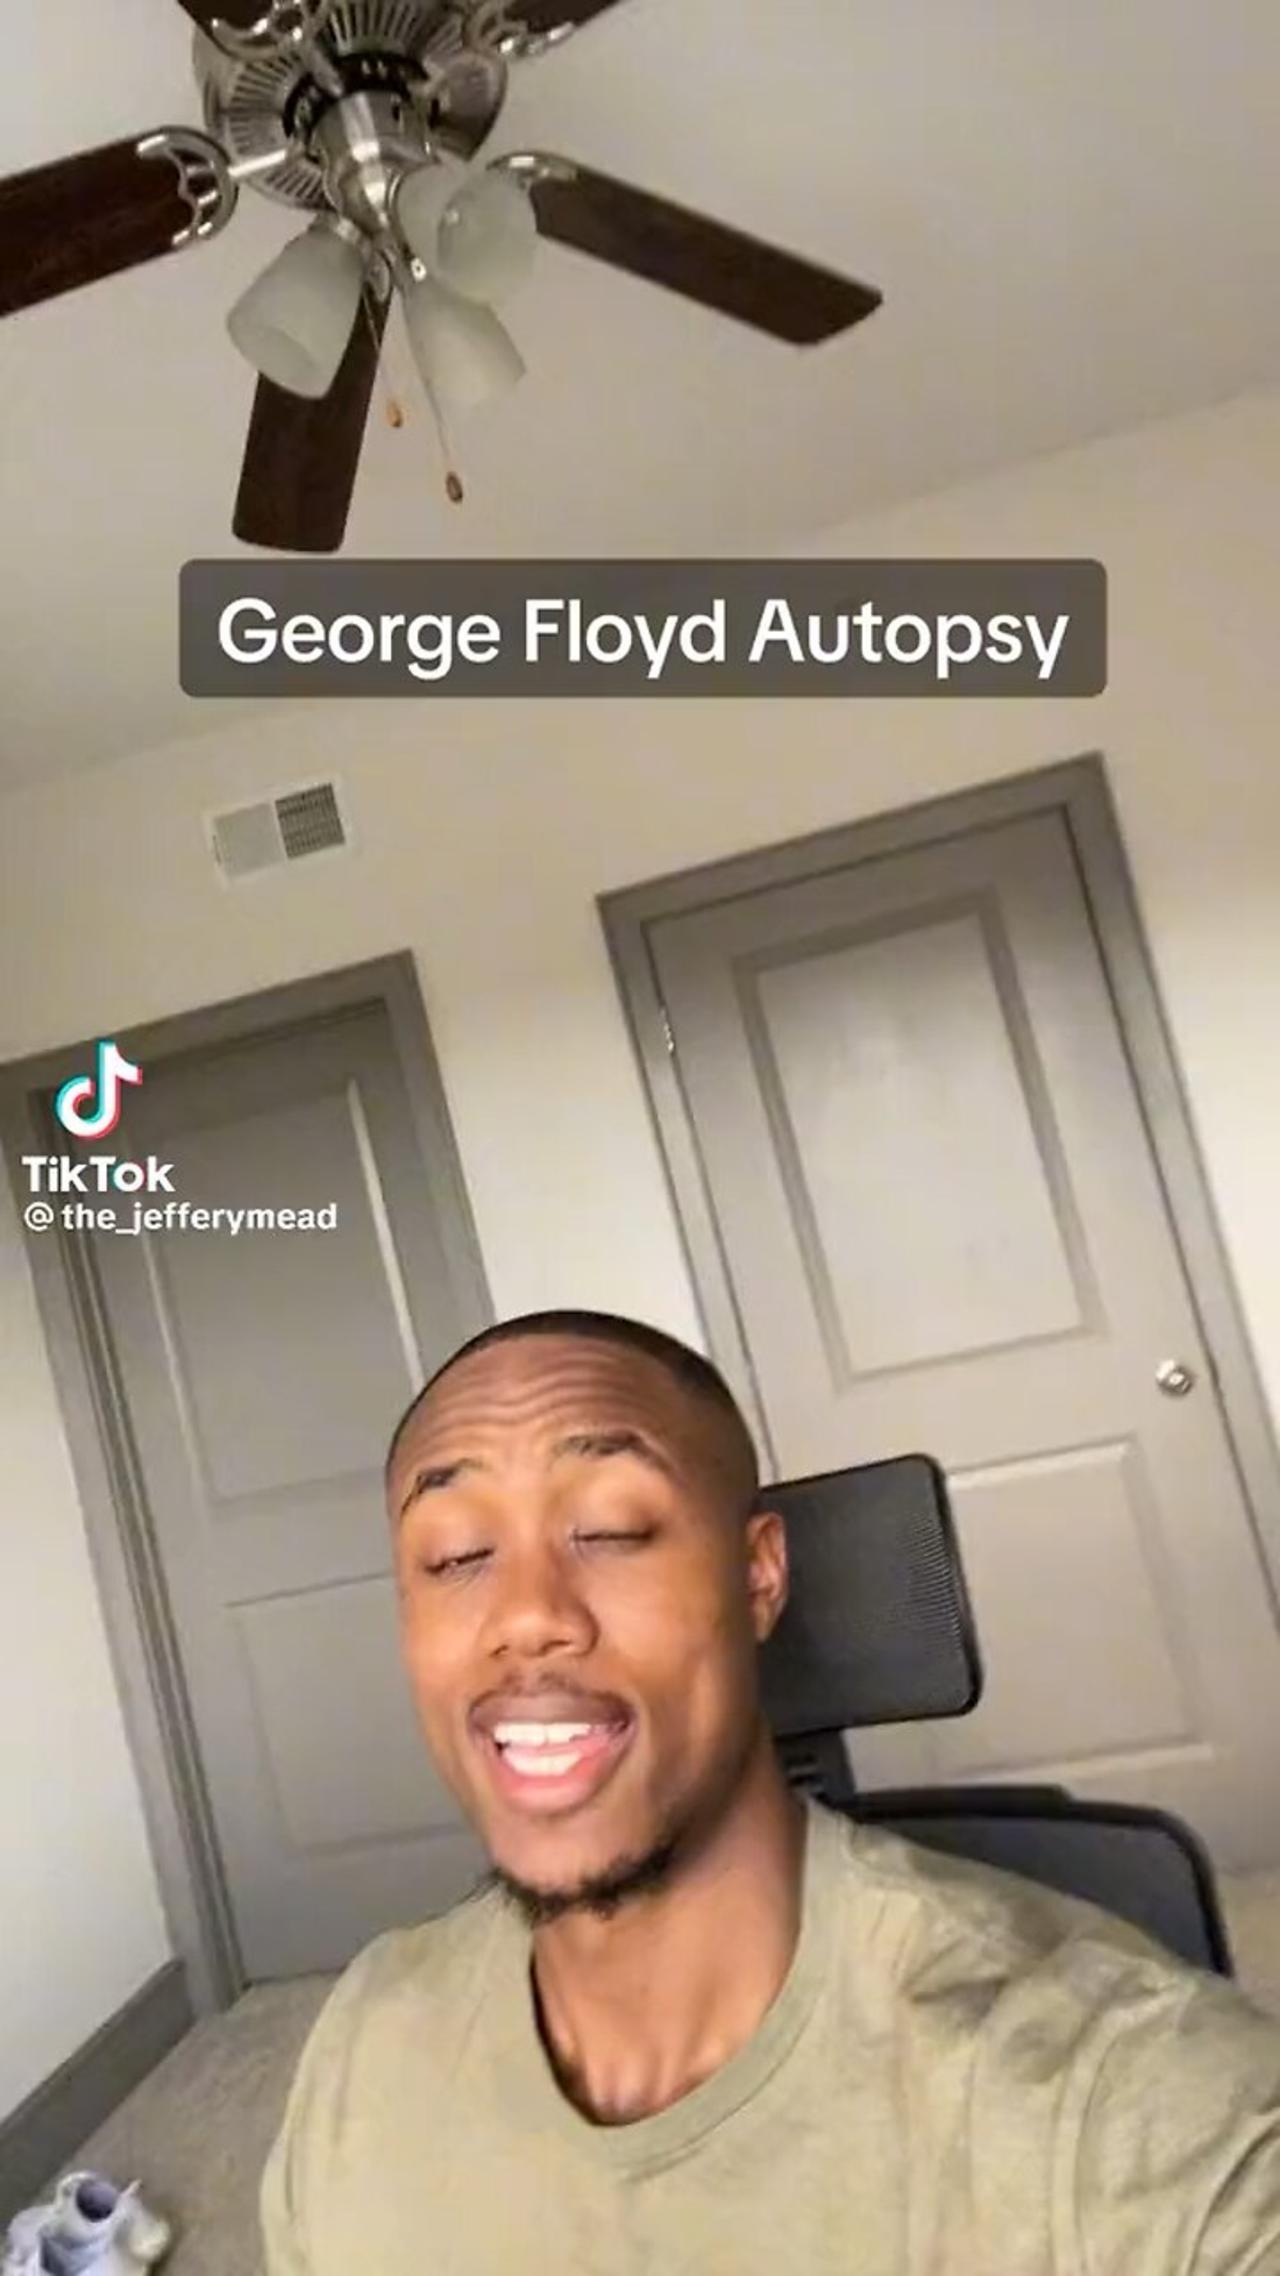 Information about George Floyd autopsy